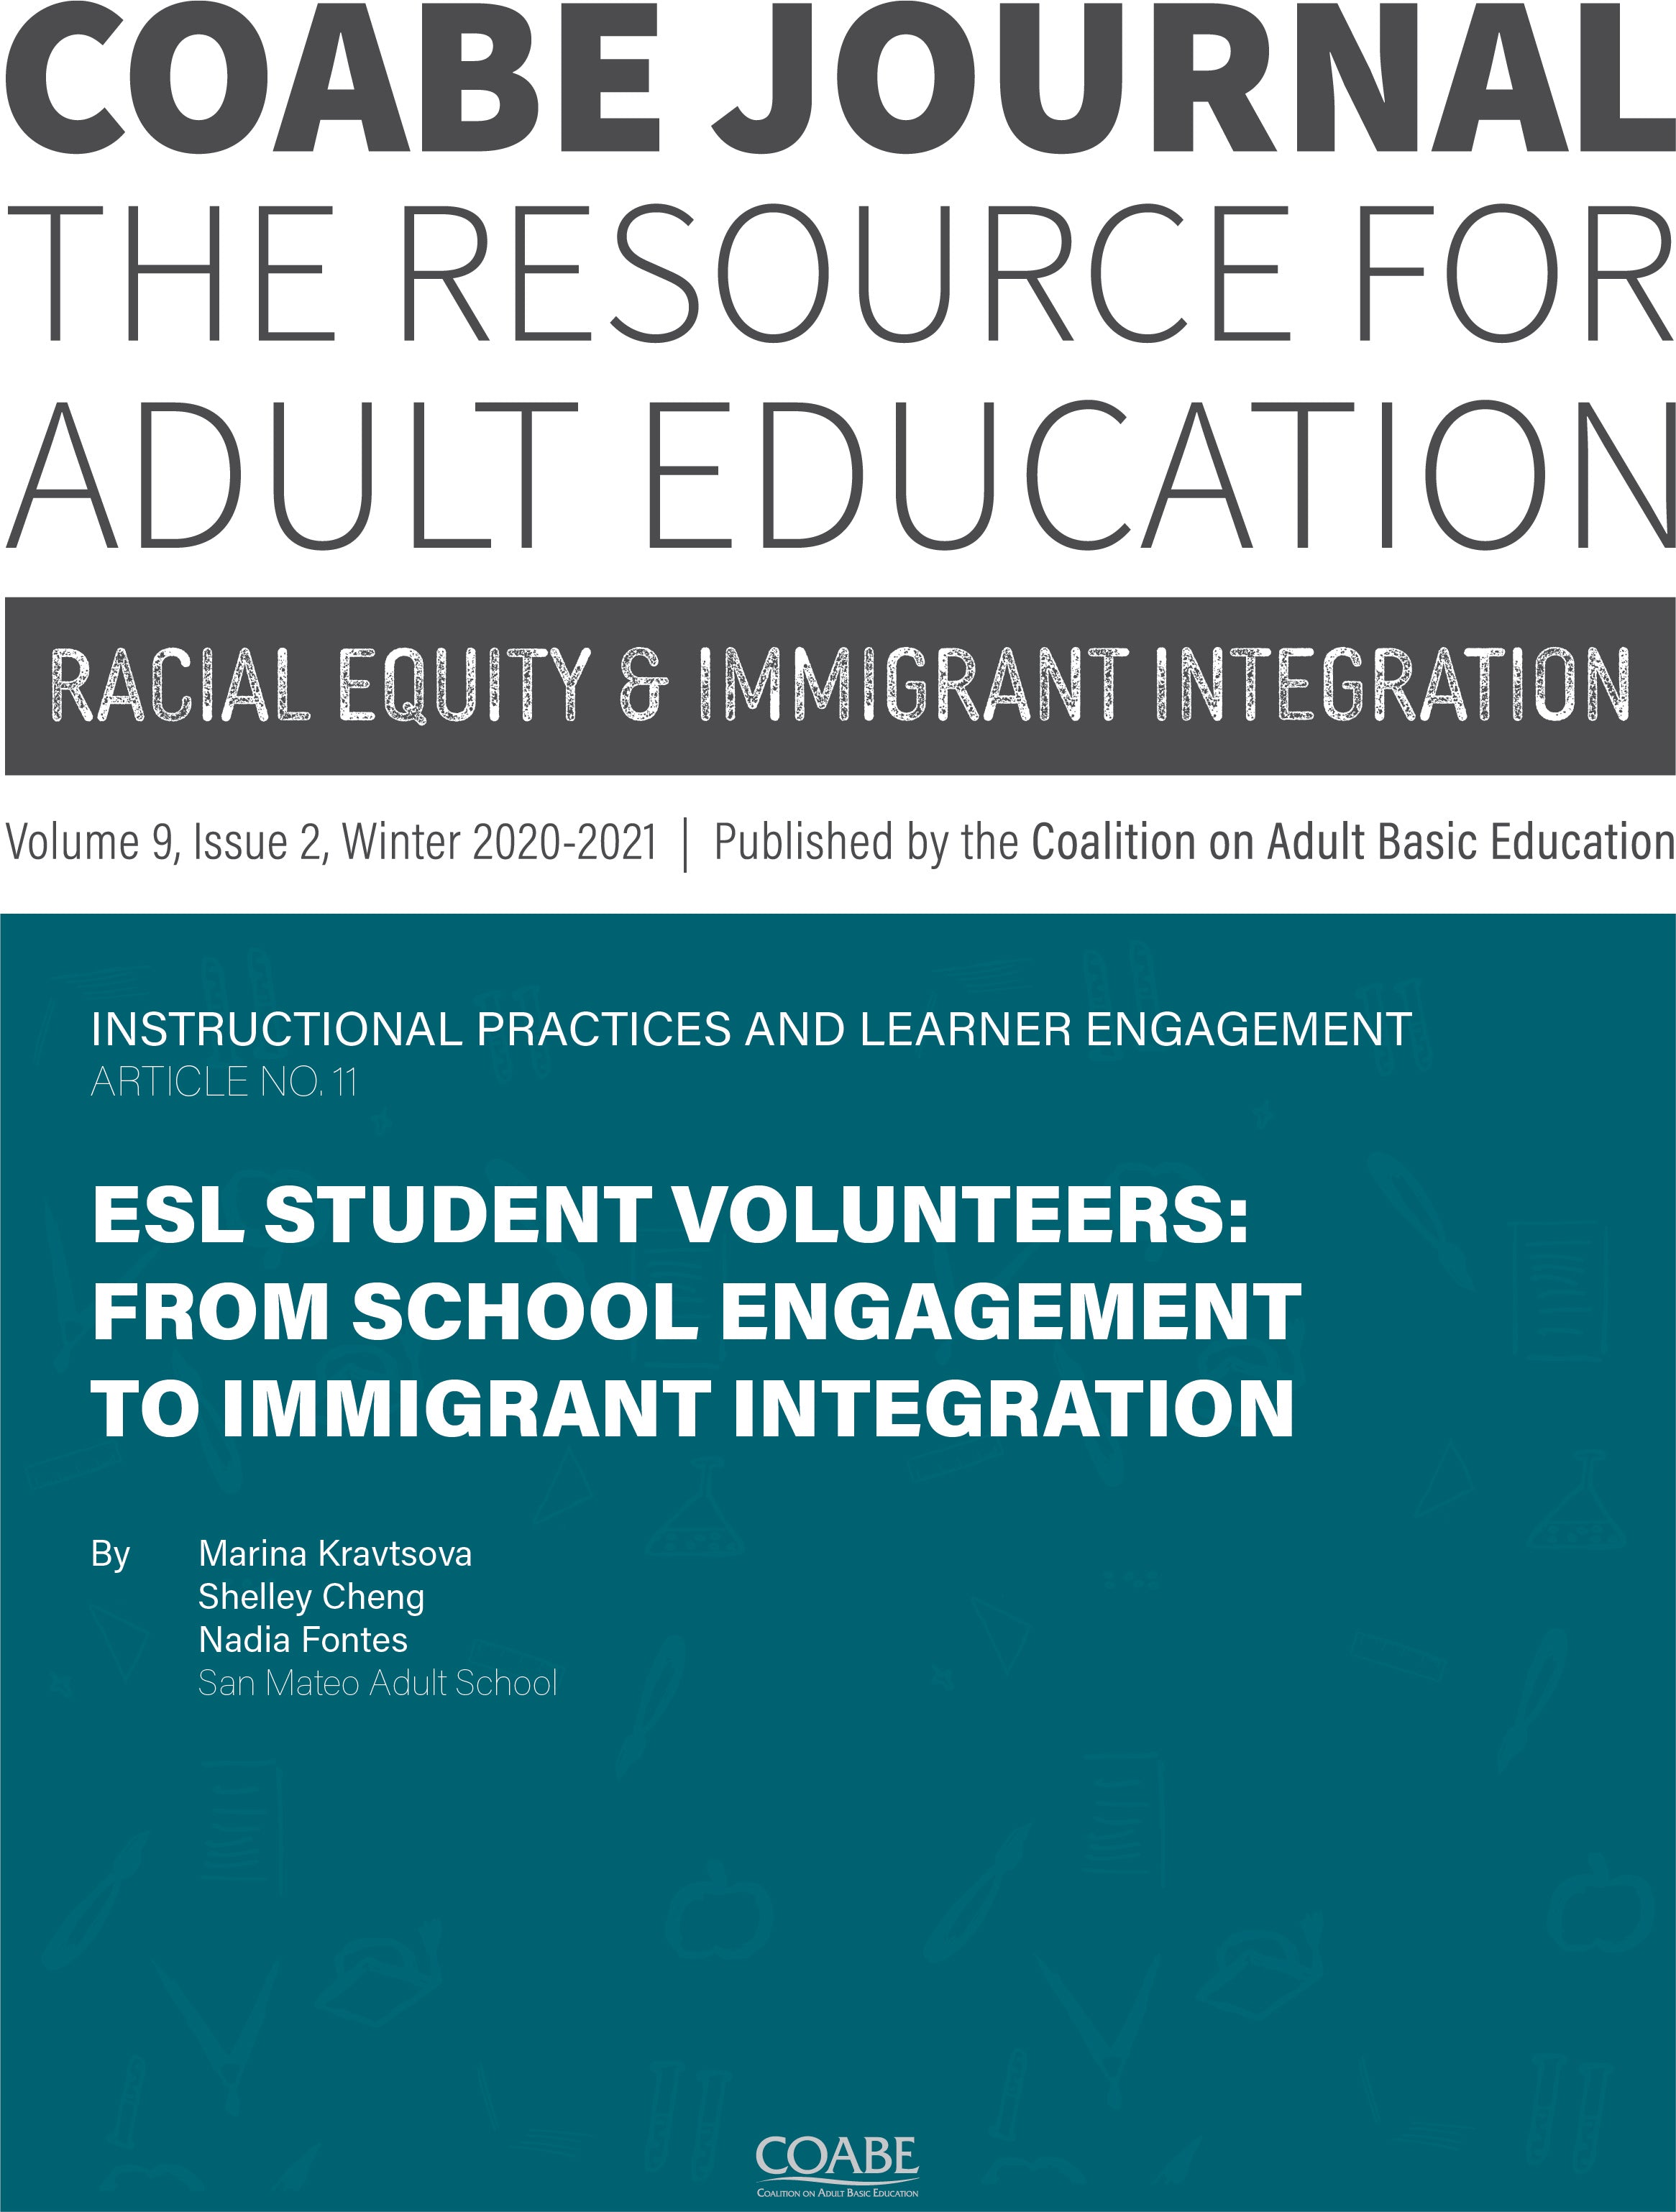 Article 11 / ESL Student Volunteers: From School Engagement to Immigrant Integration